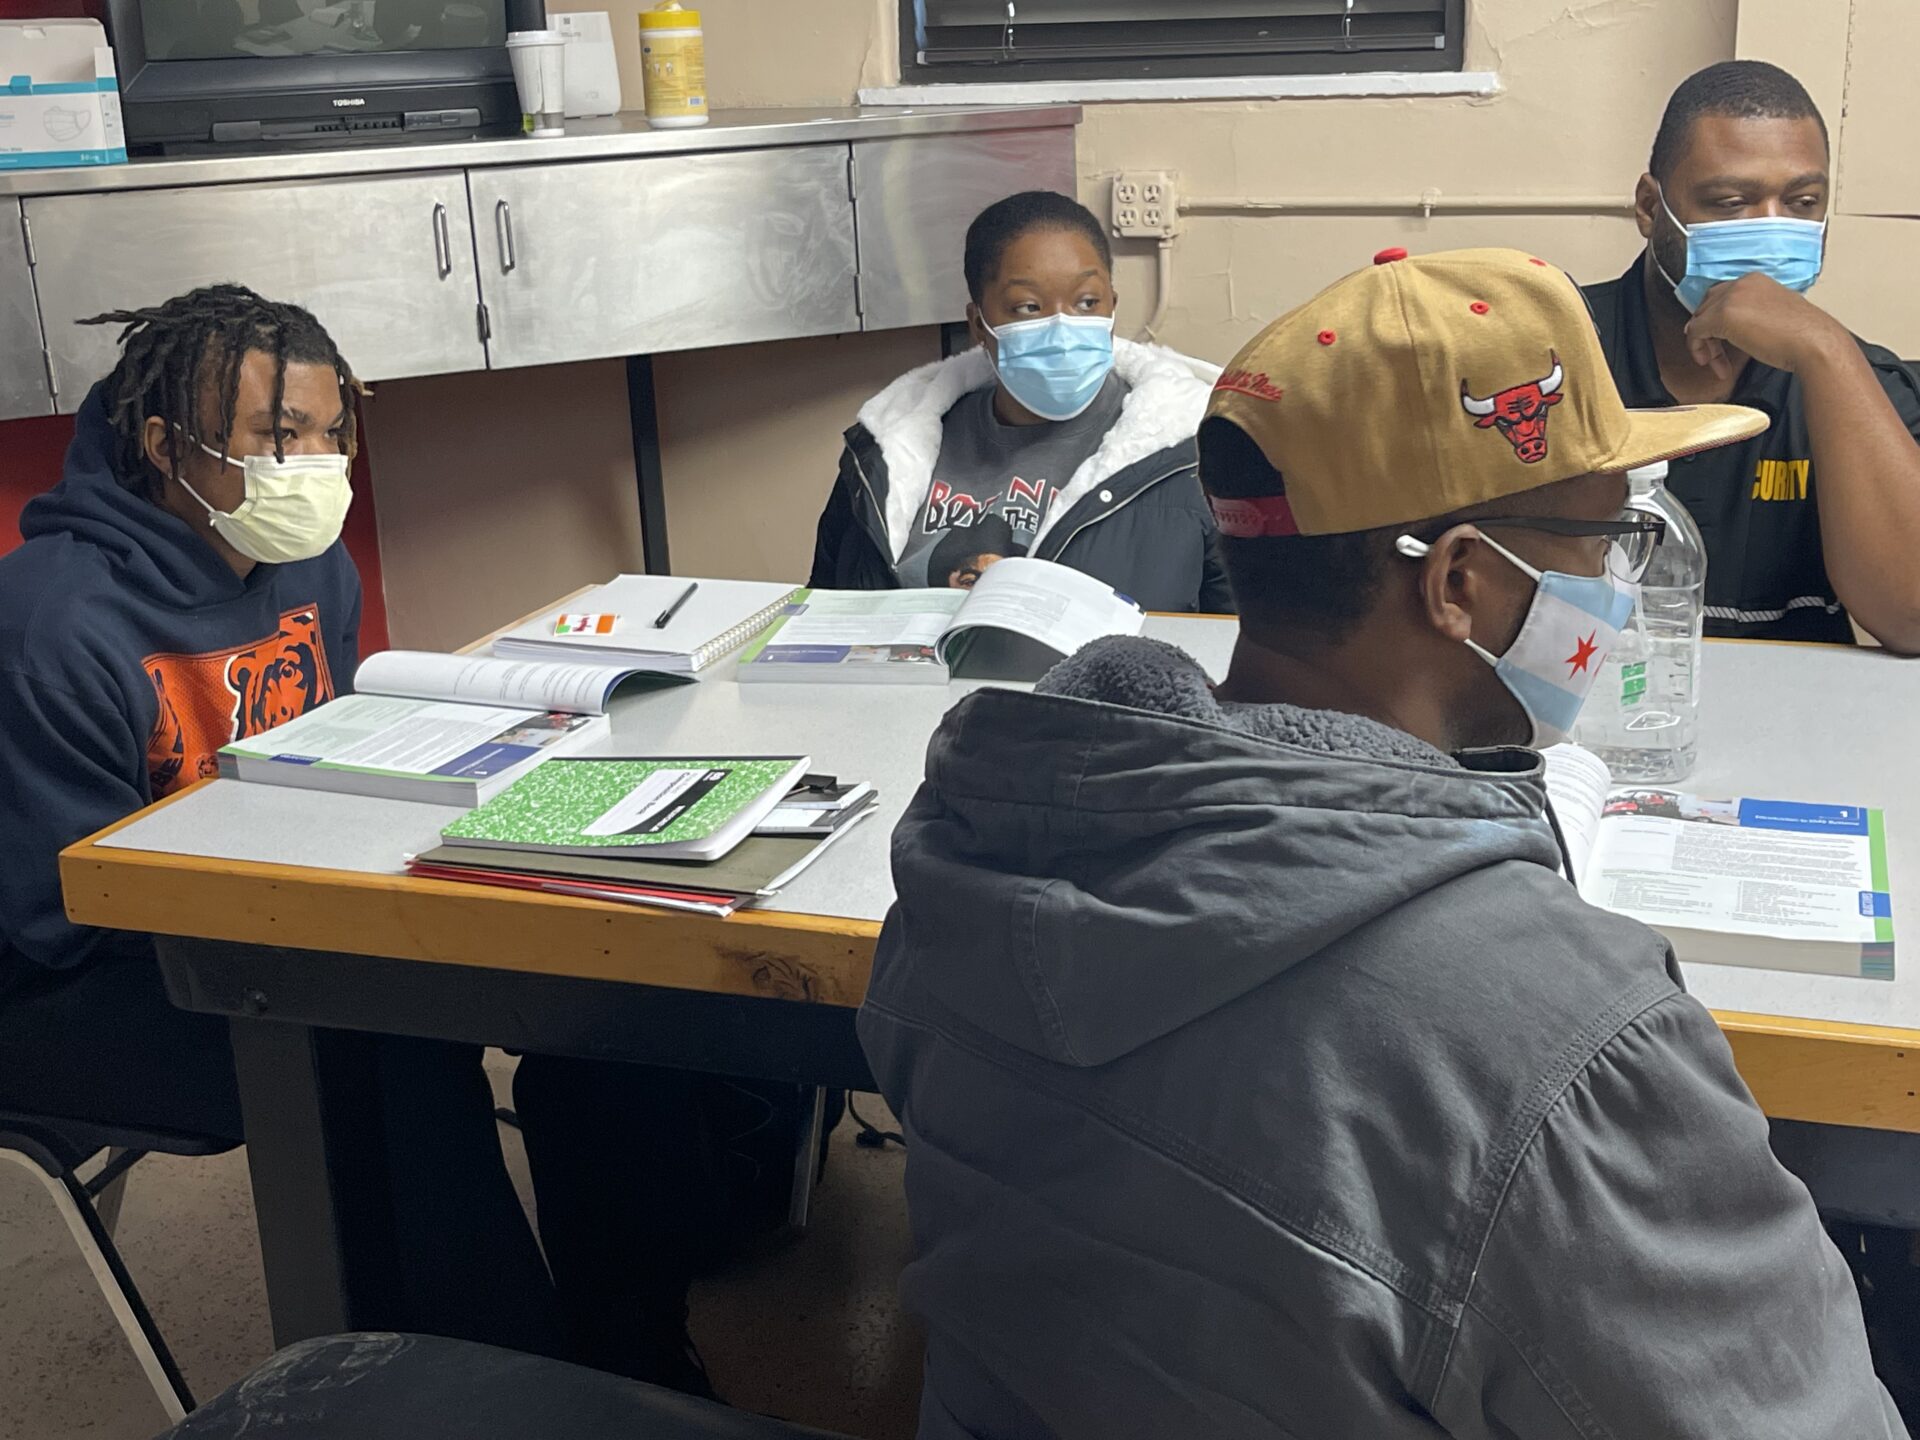 A group of people sitting at a table with masks on.